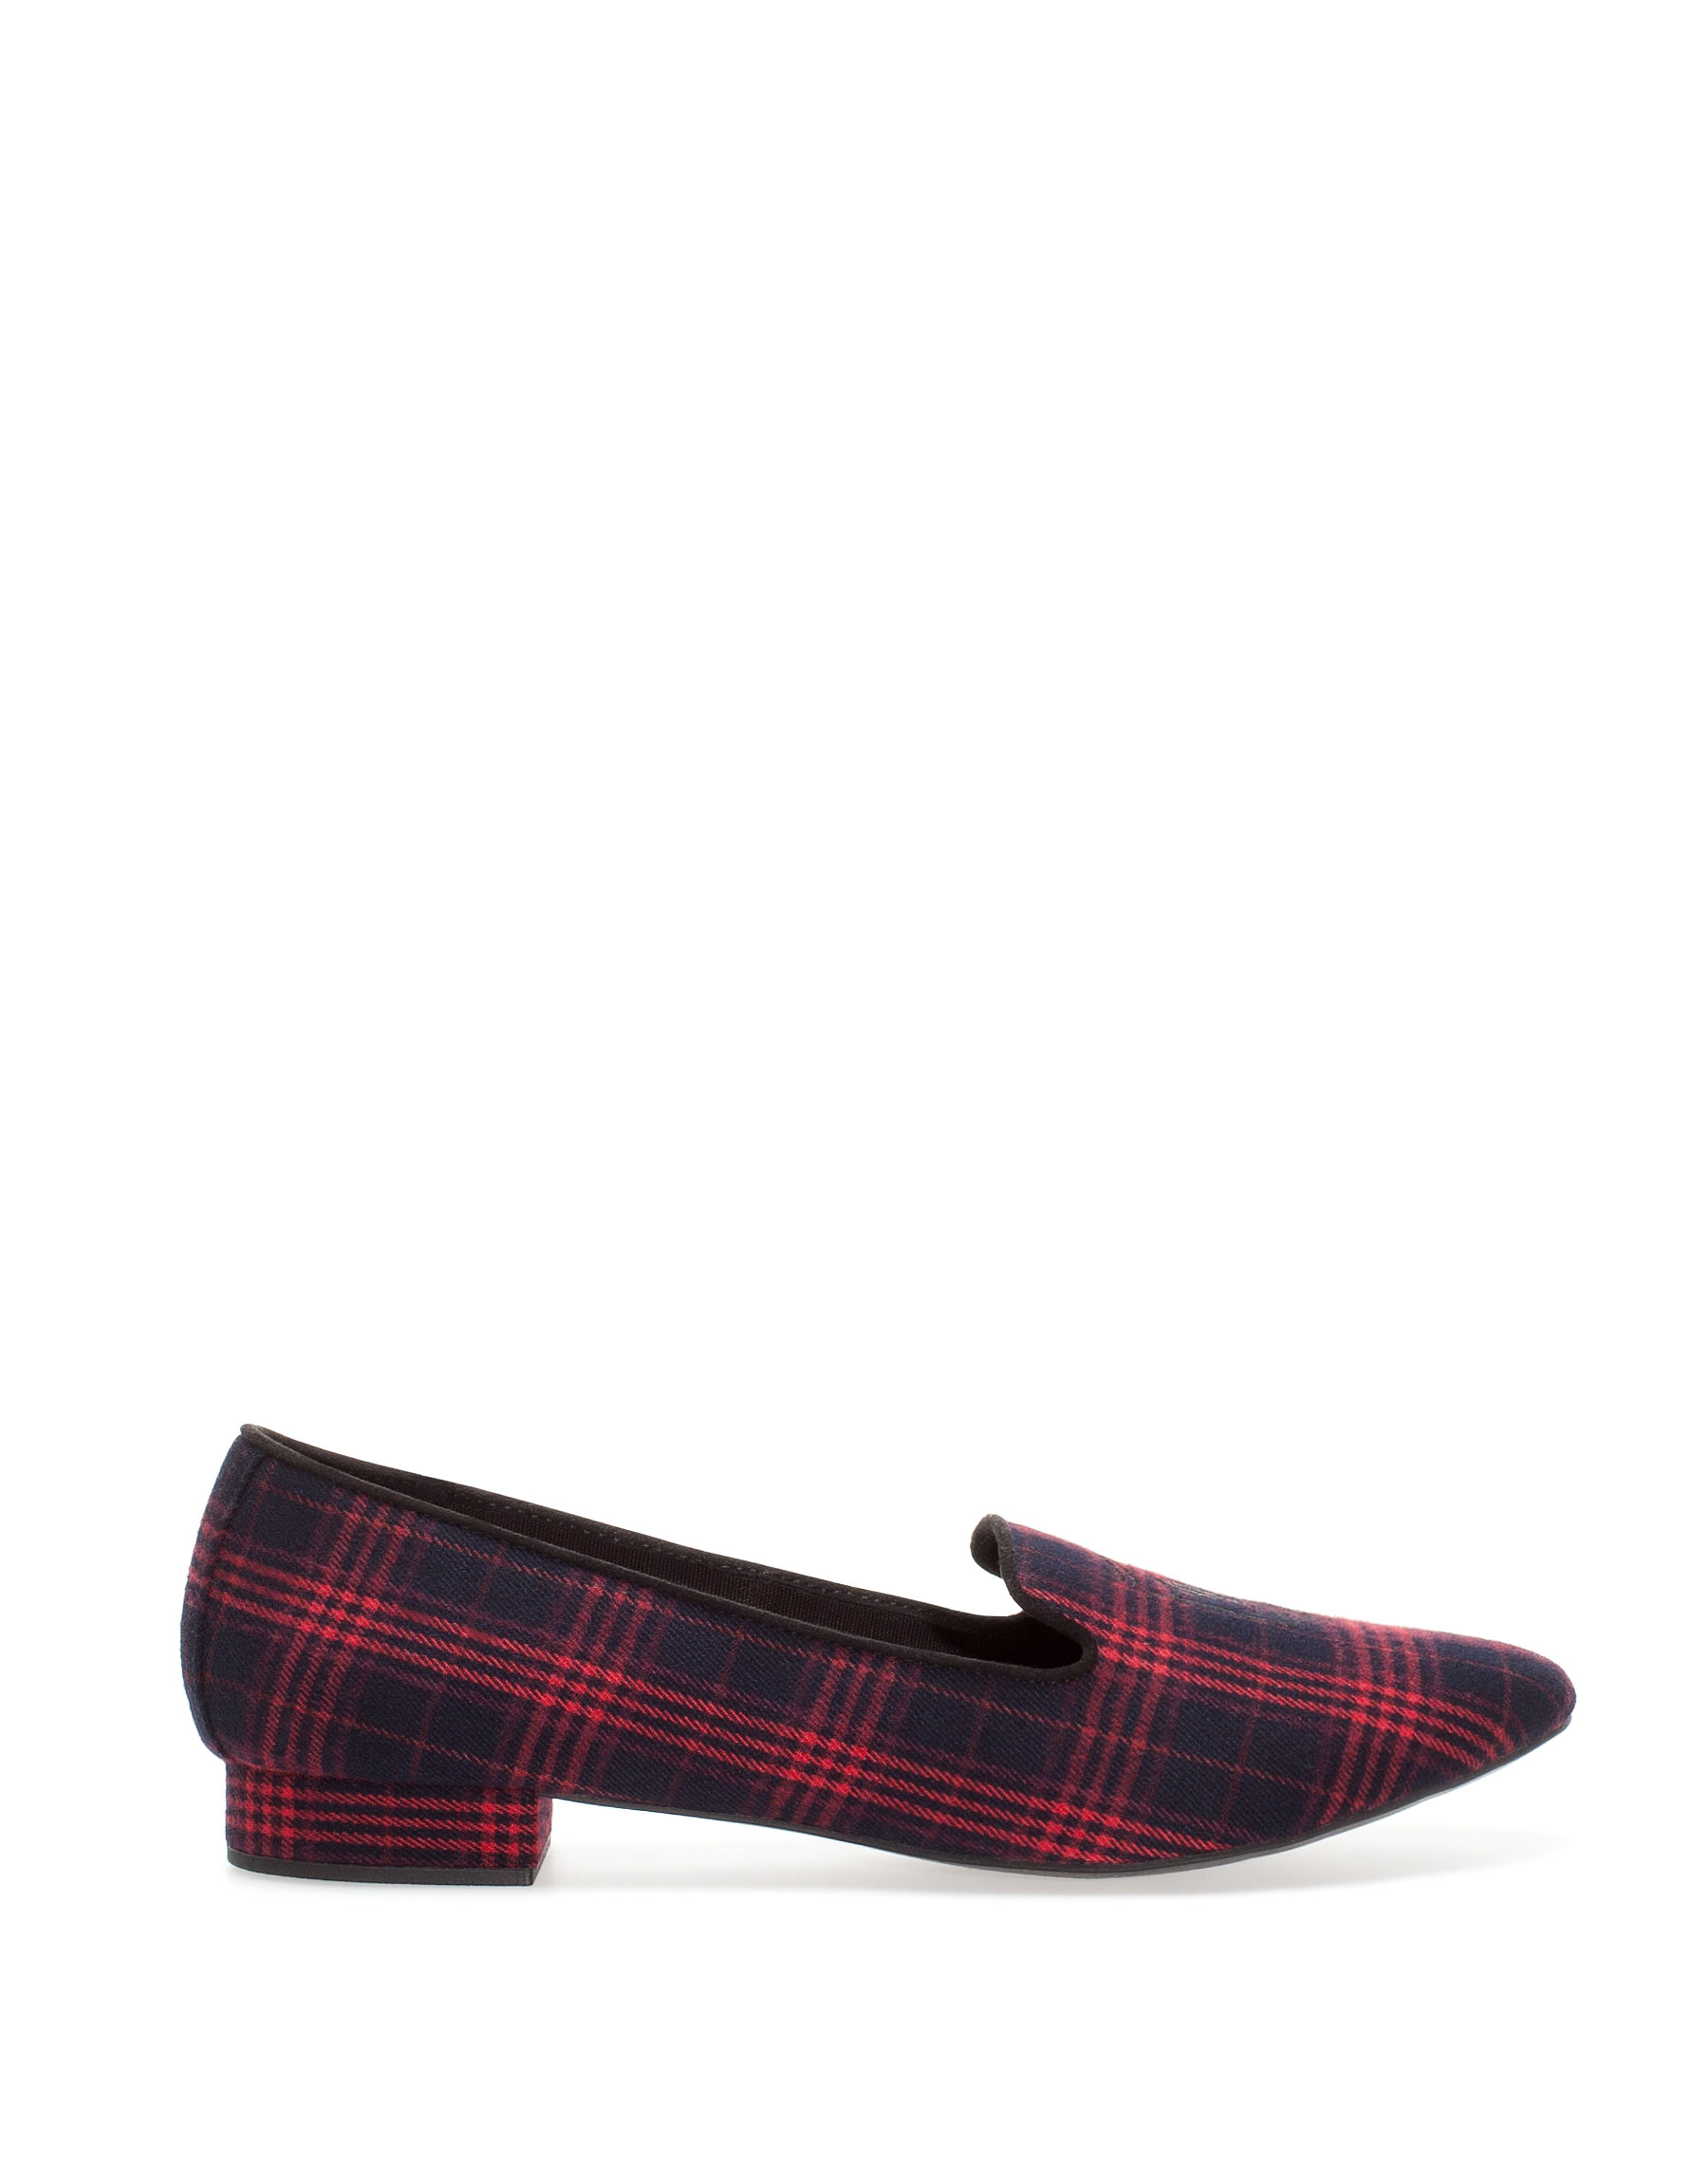 Pull&bear Check Print Loafers in Red (BURGUNDY) | Lyst